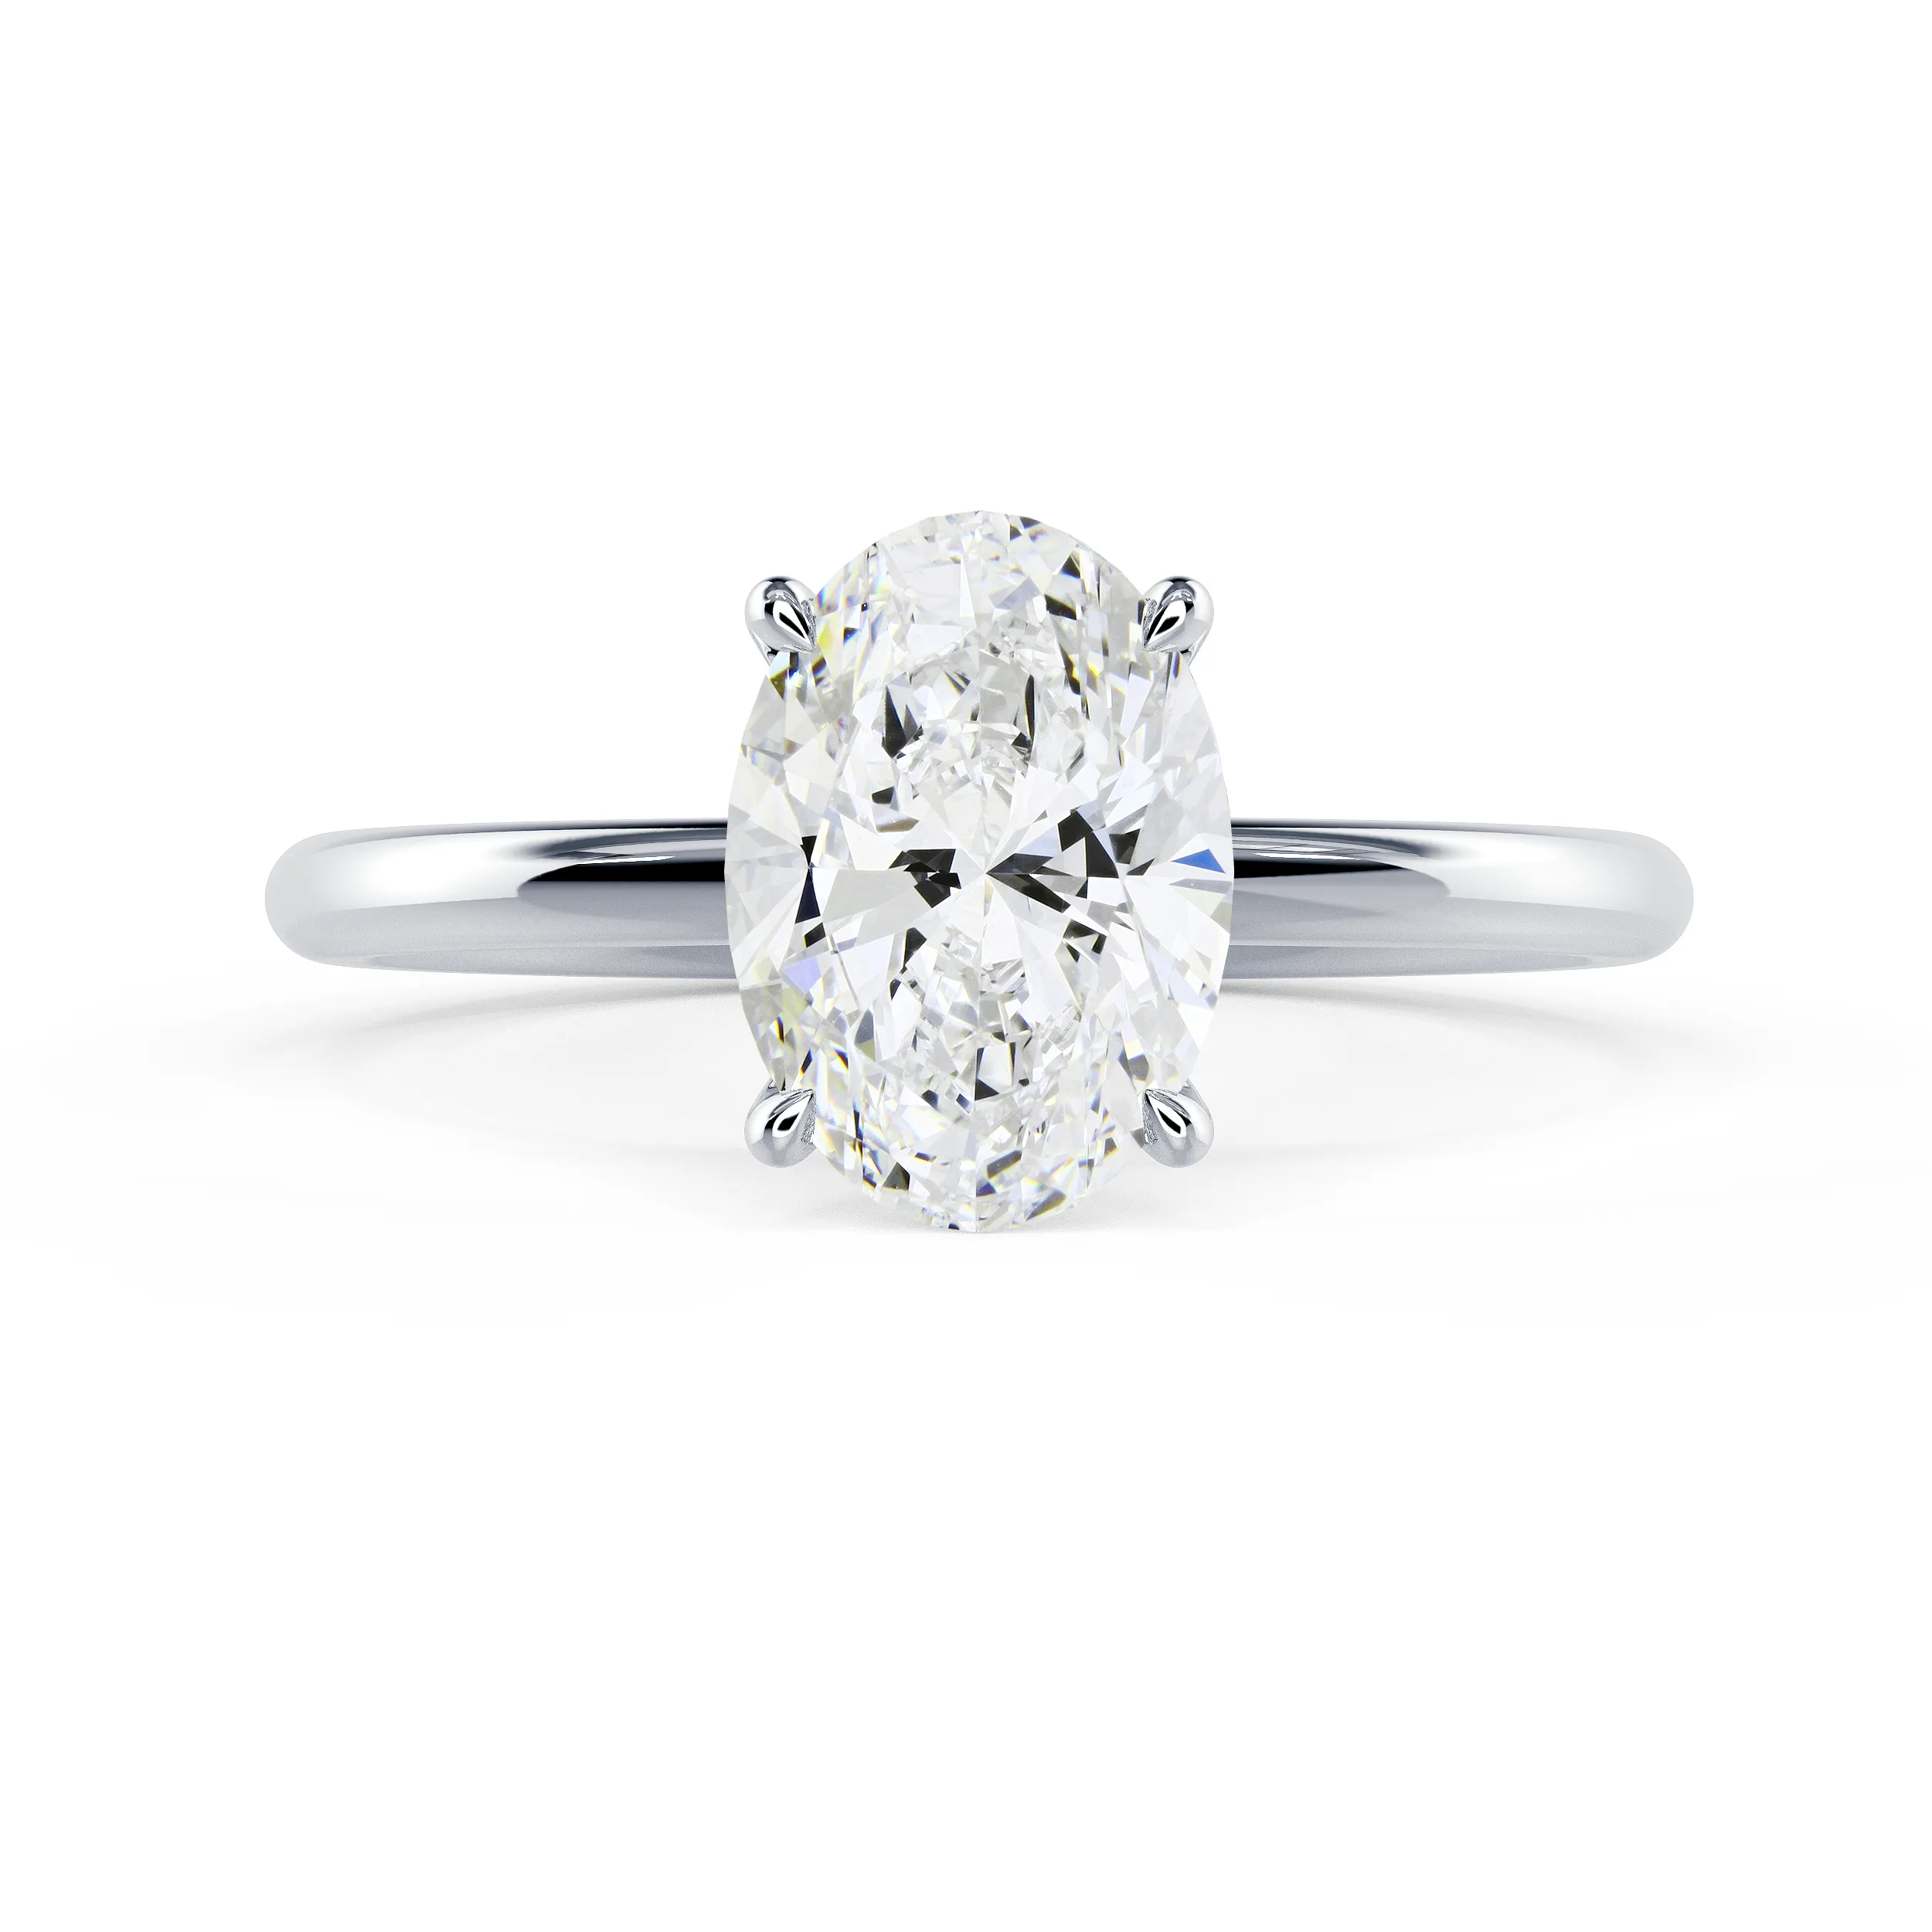 Exceptional Quality Created Diamonds Oval Classic Four Prong Solitaire Diamond Engagement Ring in White Gold (Main View)